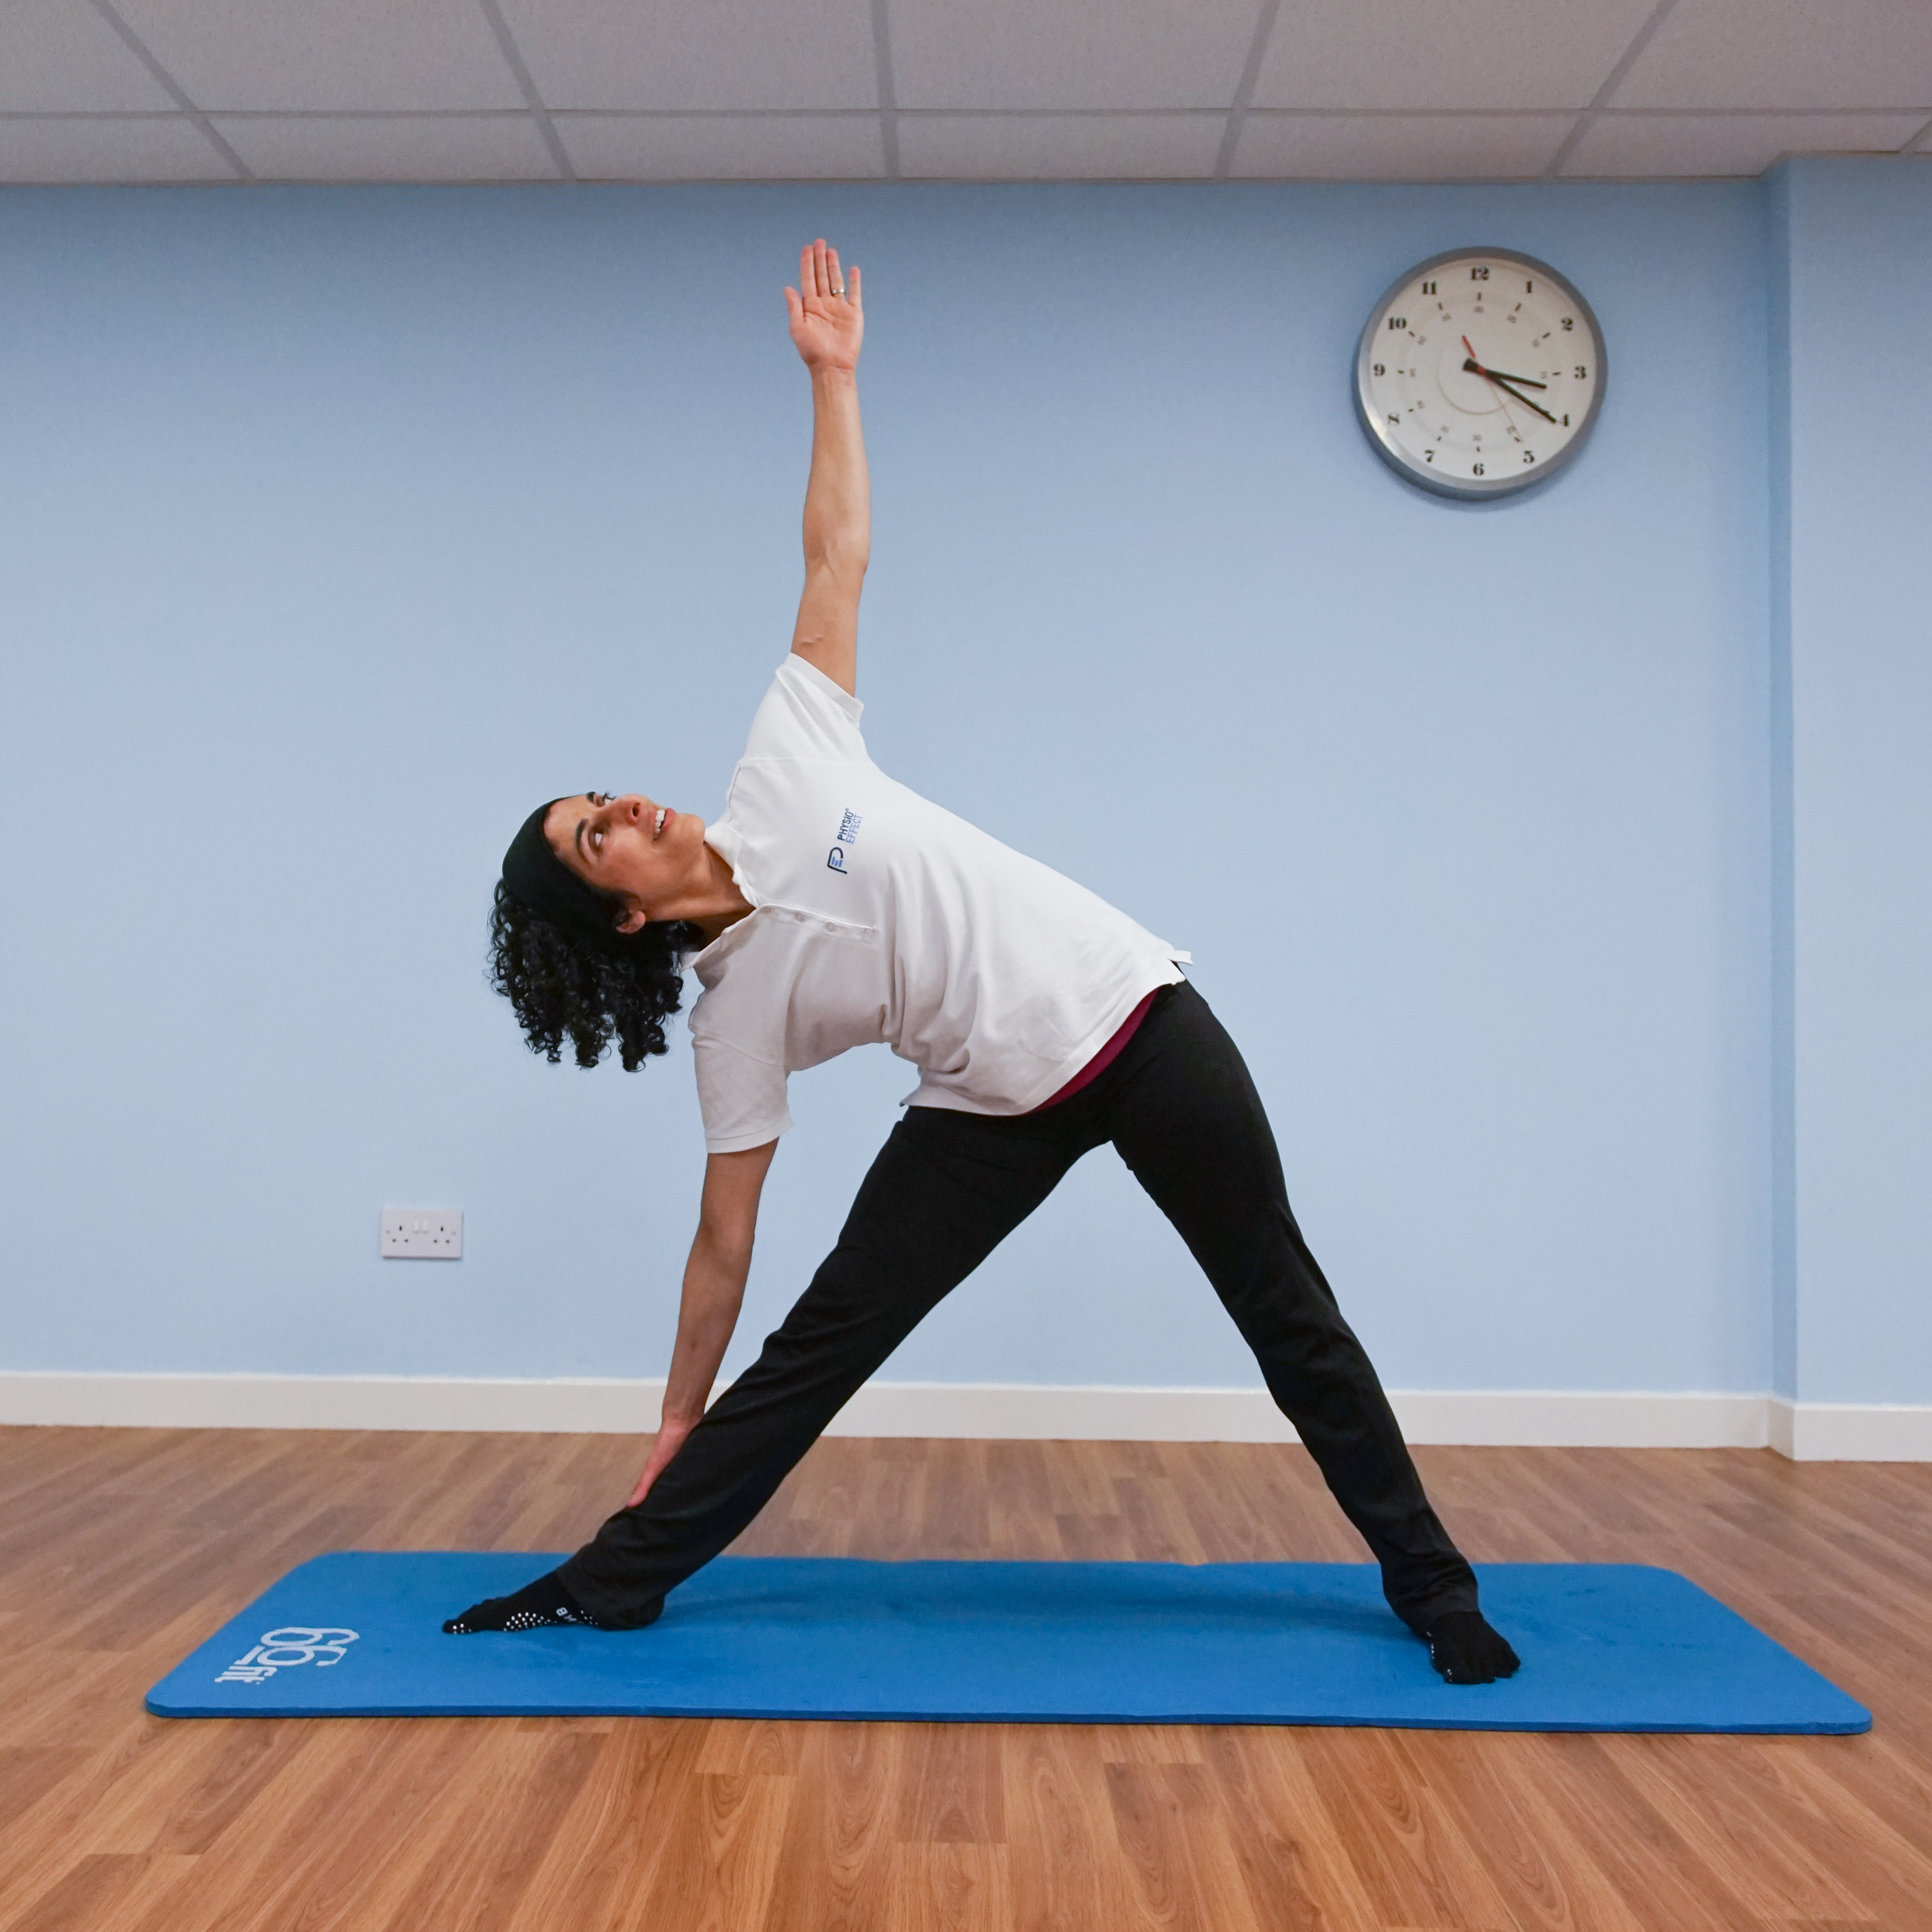 6 Benefits Of Yoga Training That You Are Still Unaware Of